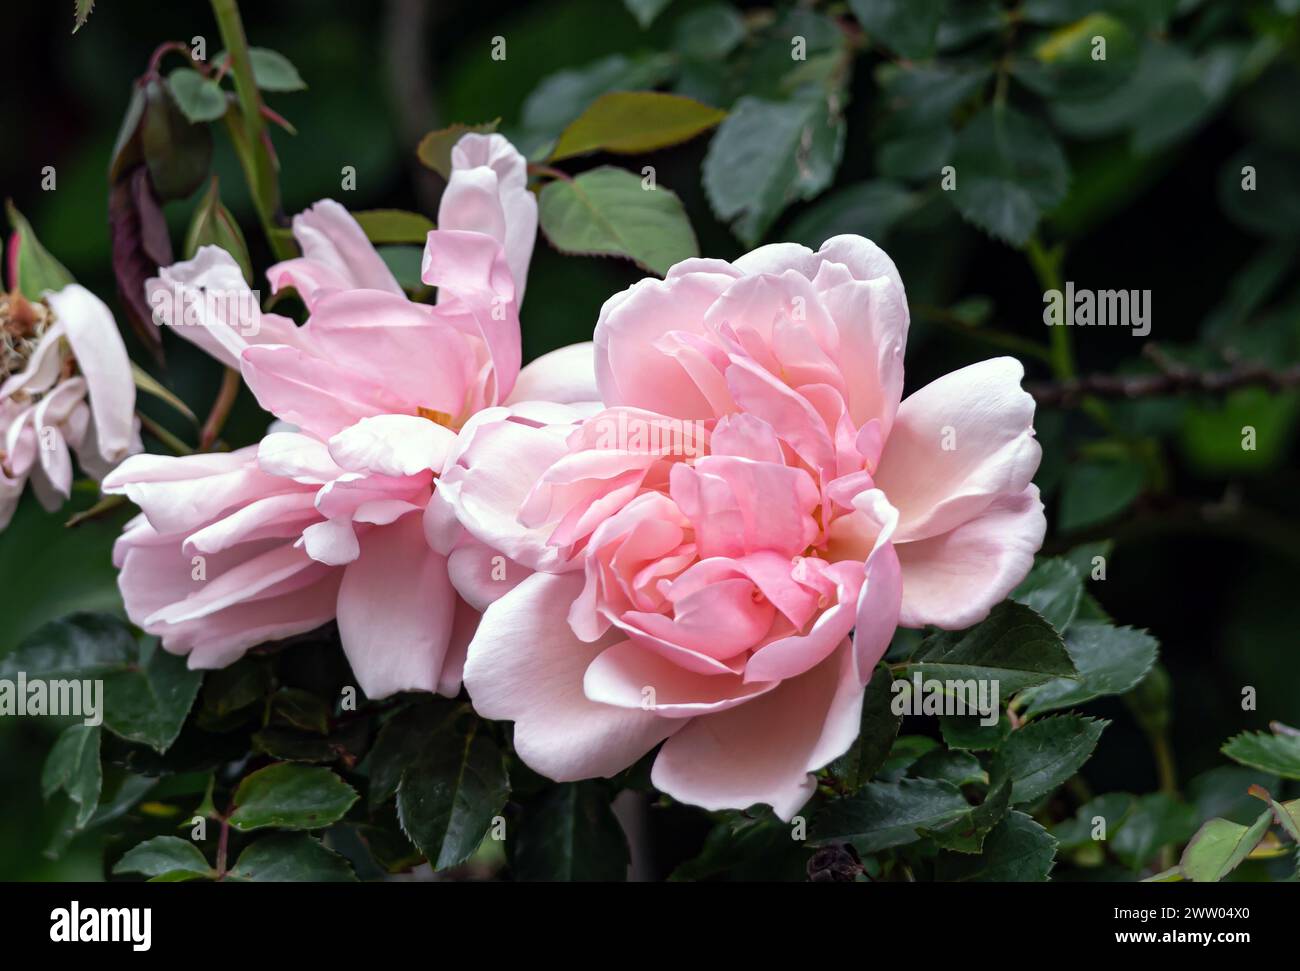 Two blossoming buds Roses Morgengruss surrounded by green foliage of a bush, in the garden. Rosa Felicia Albertine. Salmon pink color flowers, close u Stock Photo